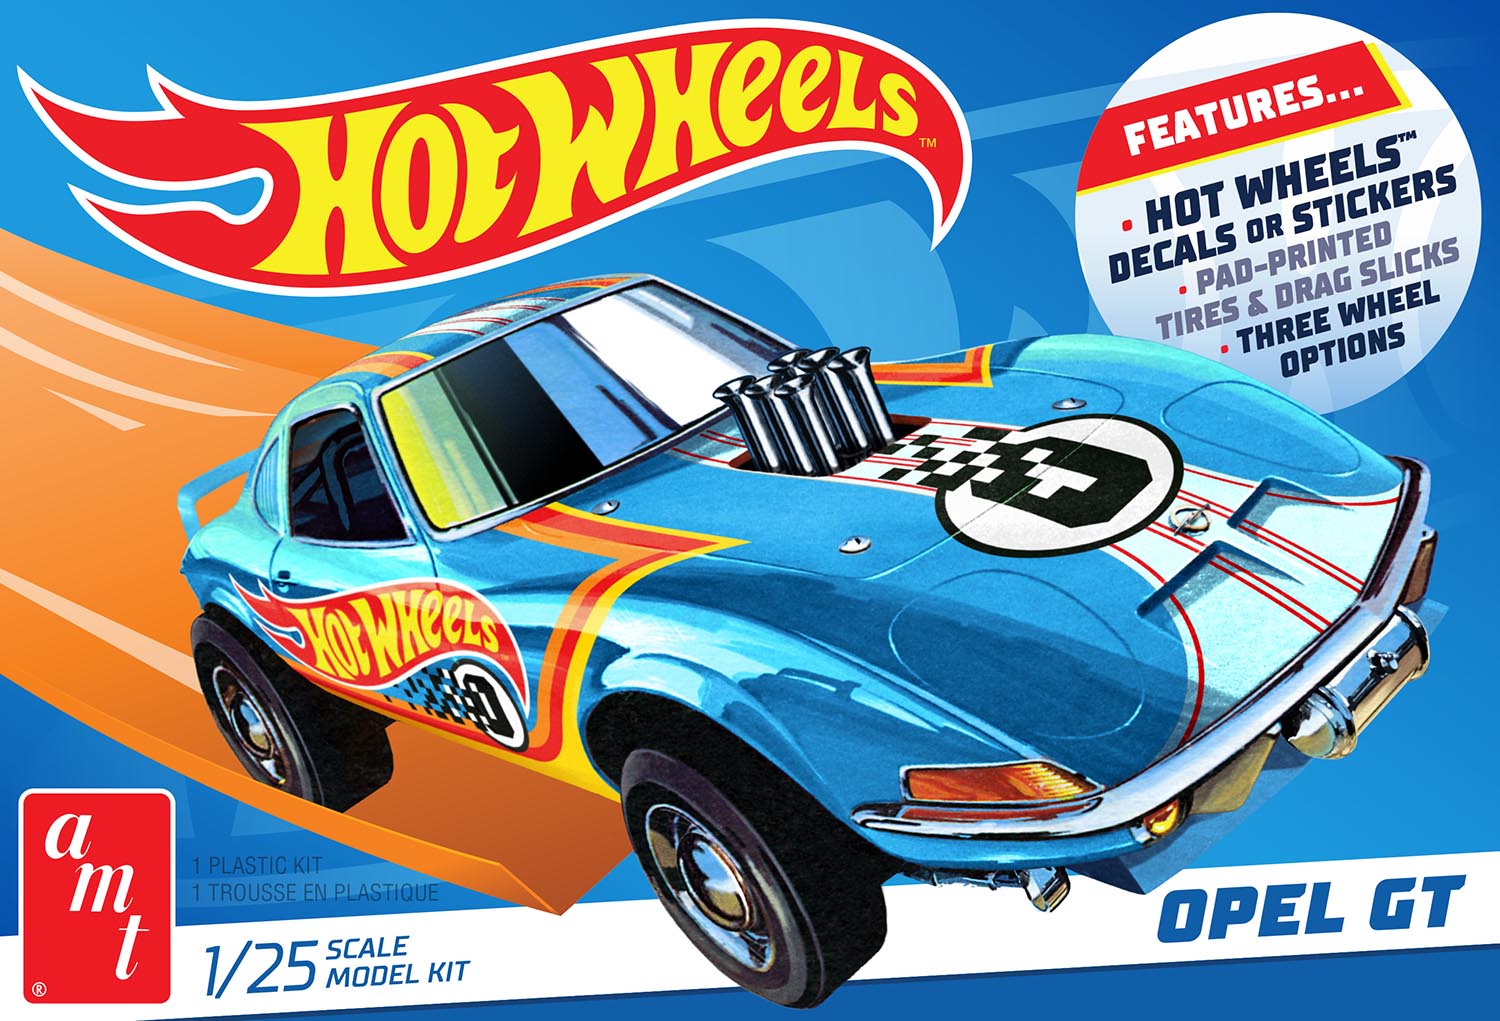 AMT Hot Wheels Buick Opel GT 1:25 Scale Model Kit box cover